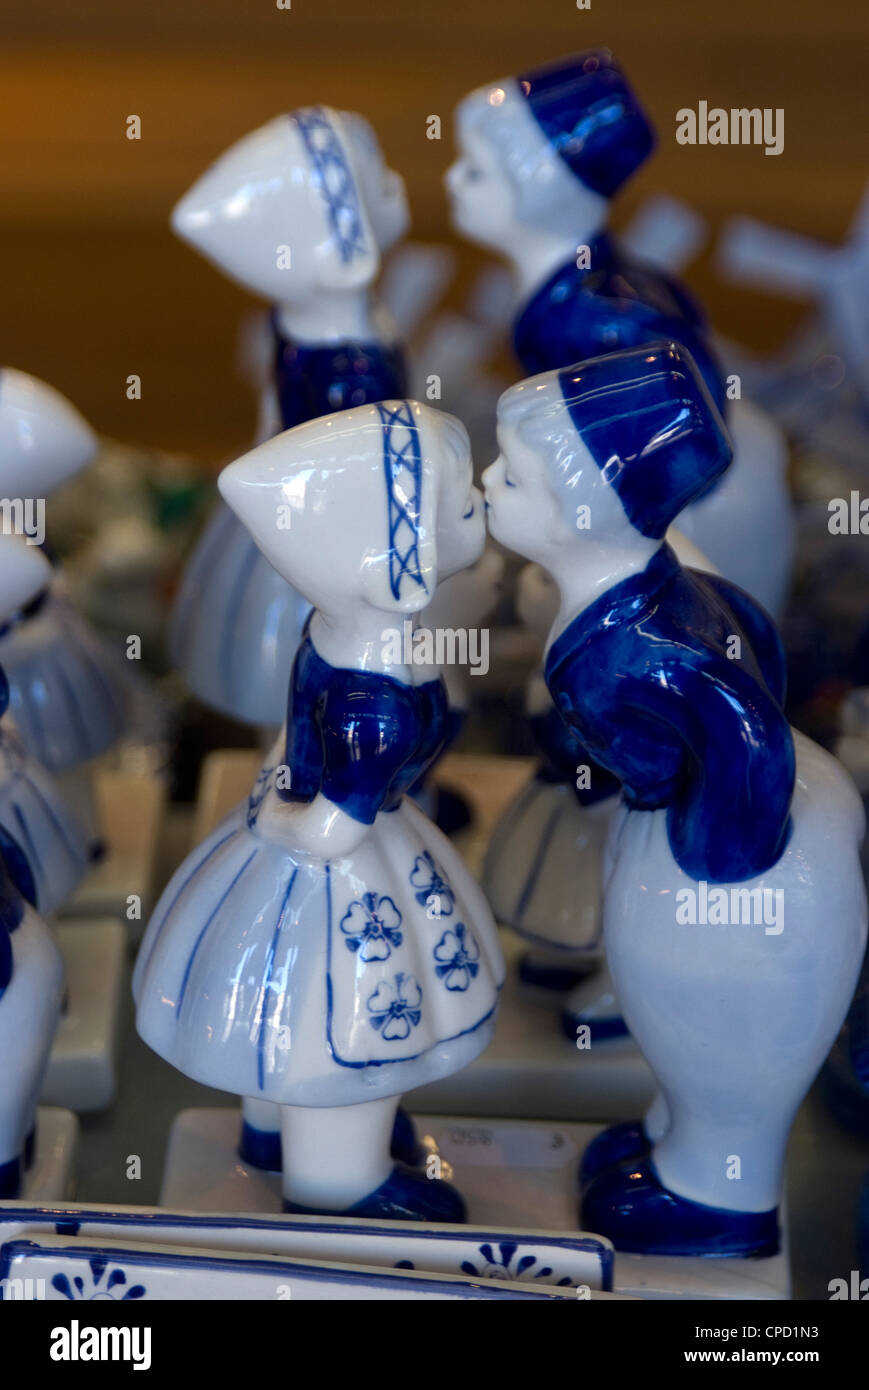 Delft pottery figures of traditional Dutch girl and boy, Delft, Netherlands, Europe Stock Photo